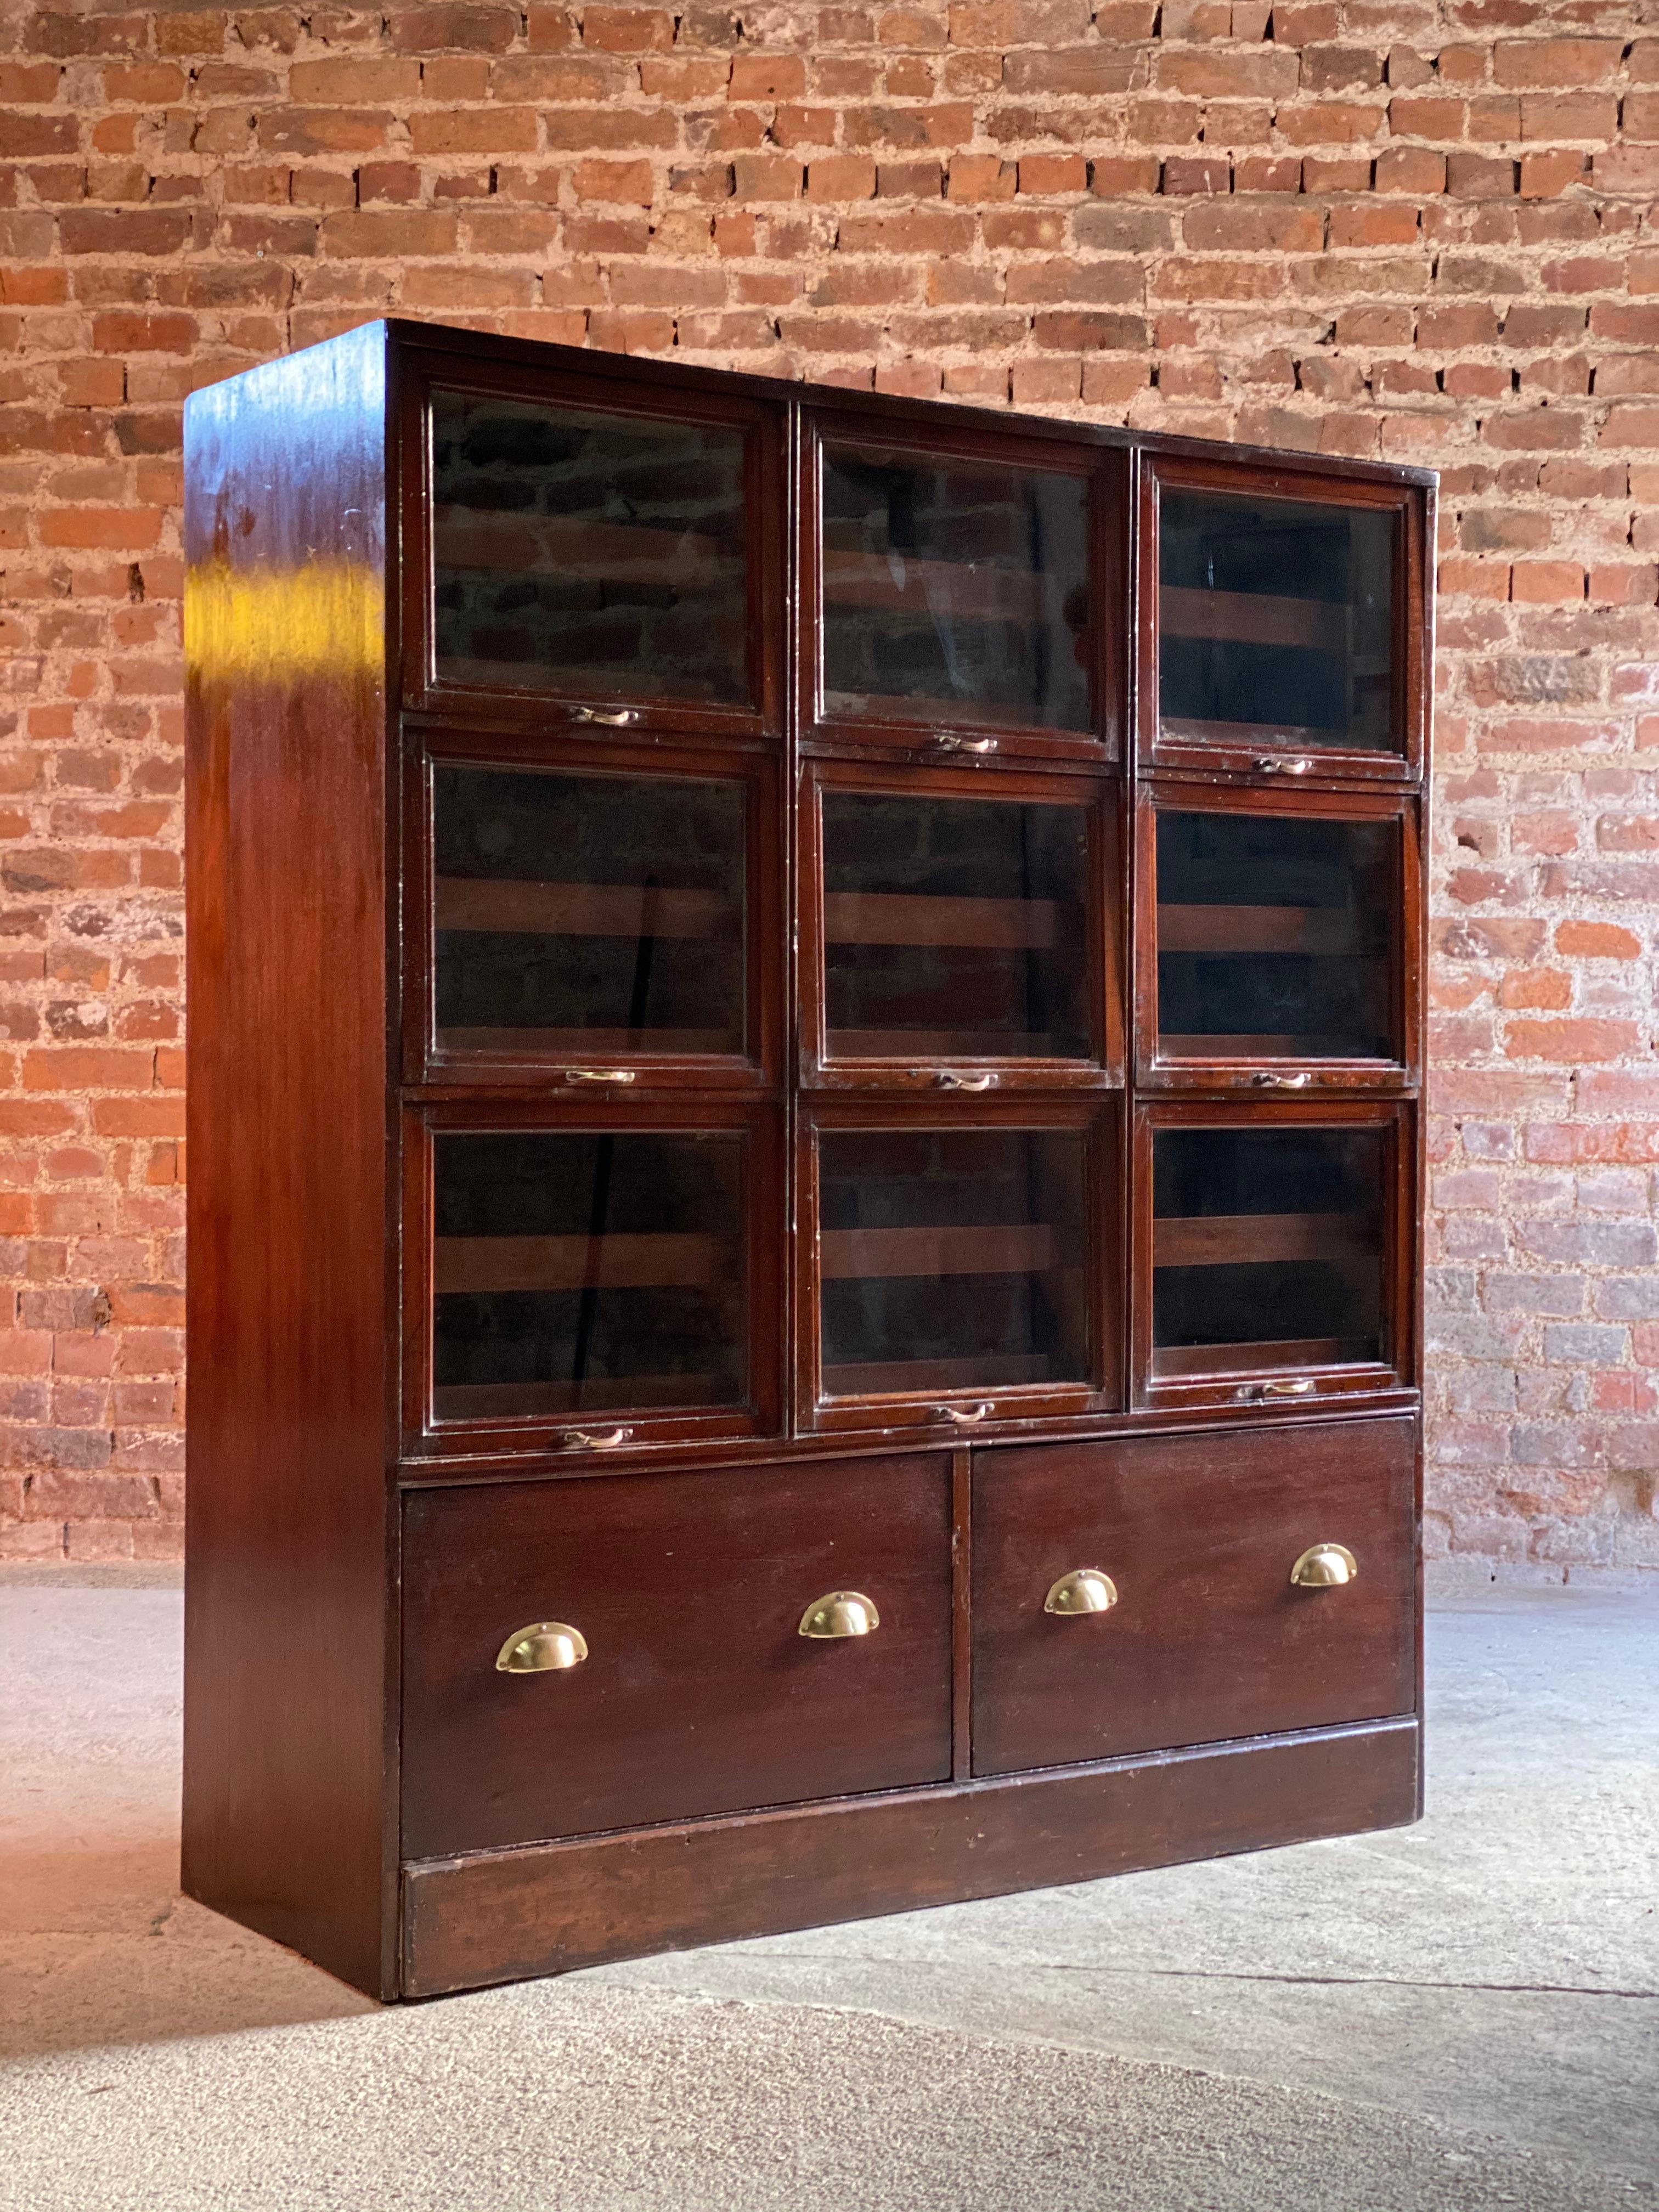 Haberdashery drapers shop display cabinet mahogany loft style, circa 1940

W are delighted to this magnificent early 20th century British mahogany haberdashery drapers display cabinet circa 1940, the rectangular top over nine 'up and over' glass